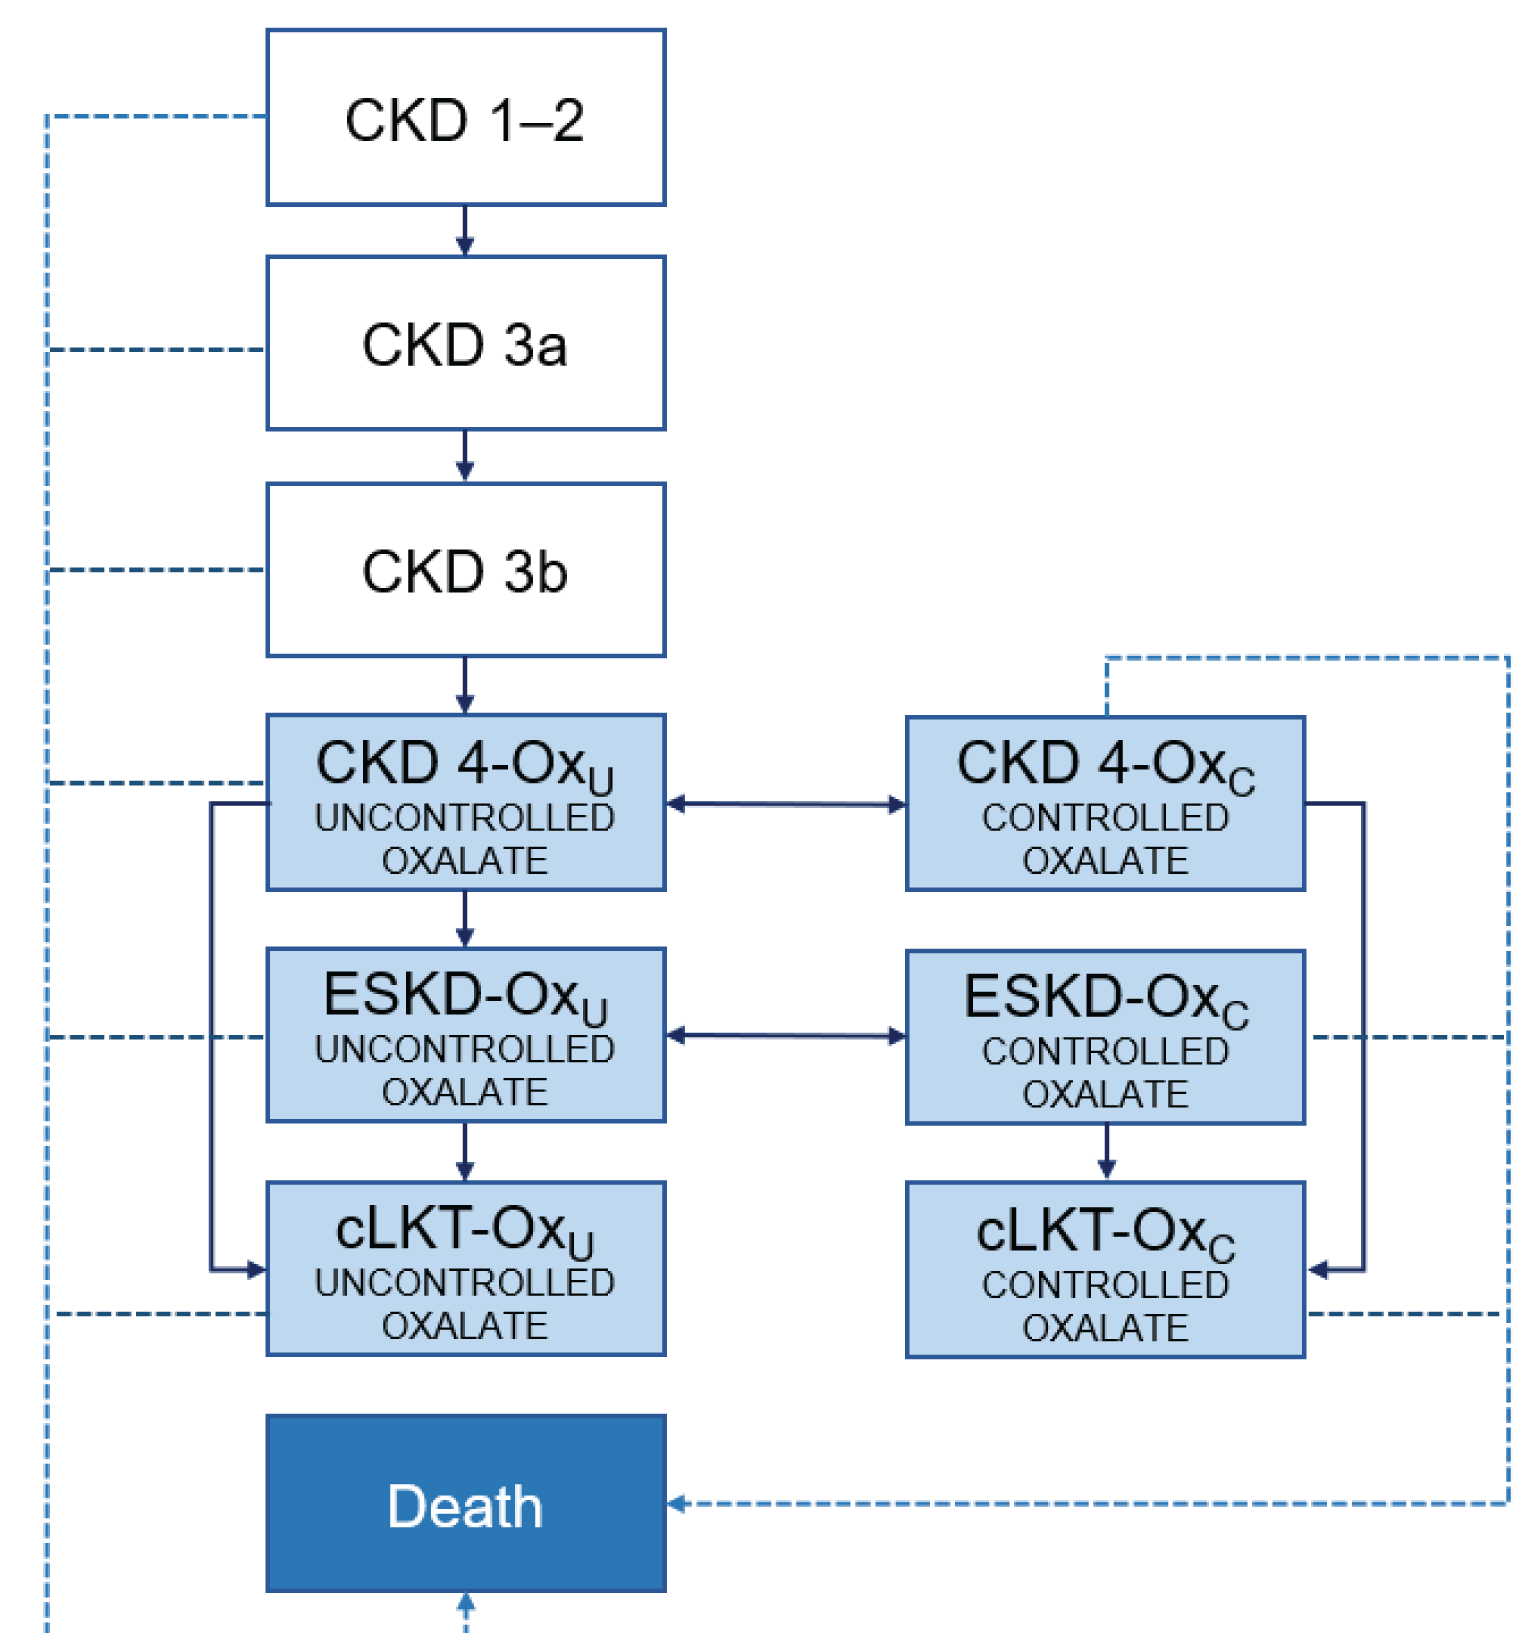 Diagram of the Markov Model states and movement between them. The 10 health states were CKD 1 to 2, CKD 3a, CKD 3b, CKD 4-Oxu, CKD 4-Oxc, end-stage kidney disease (ESKD-Oxu, ESKD-Oxc), and posttransplantation (cLKT-Oxu, cLKT-Oxc) and death. A patient who had not yet undergone transplant could progress to the next CKD stage or remain in the same CKD stage; transition to a less severe CKD stage was not permitted. For the late-stage health states (CKD 4 and ESKD), a transition between the uncontrolled oxalate (Oxu) and controlled oxalate (Oxc) states was permitted for the lumasiran arm only.